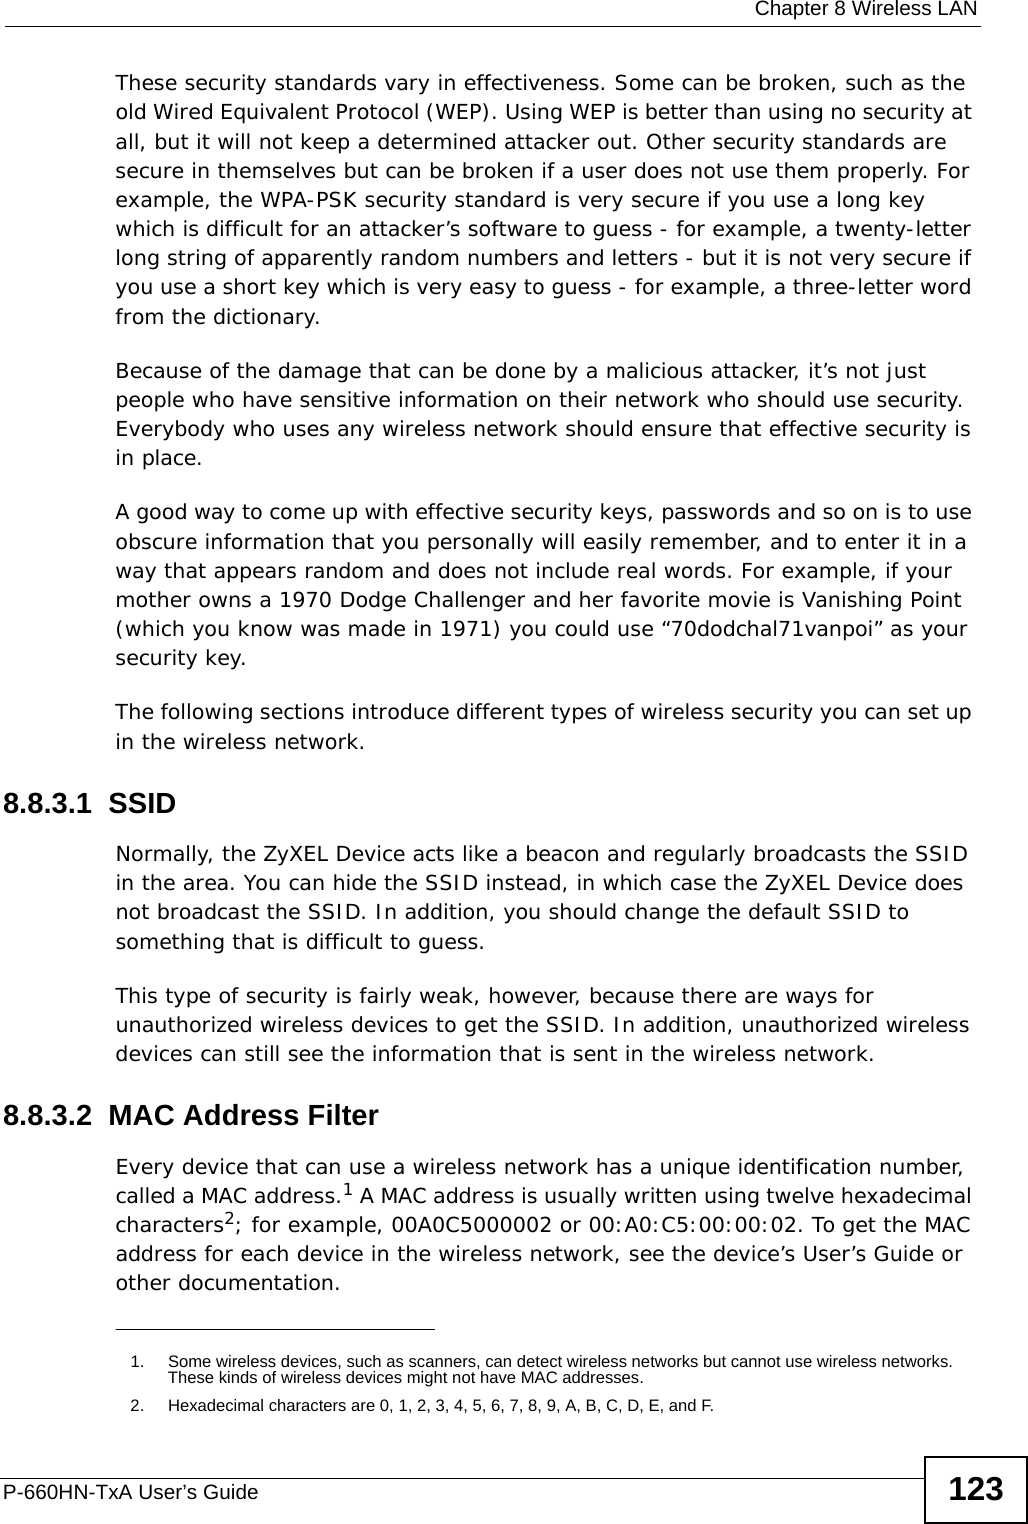  Chapter 8 Wireless LANP-660HN-TxA User’s Guide 123These security standards vary in effectiveness. Some can be broken, such as the old Wired Equivalent Protocol (WEP). Using WEP is better than using no security at all, but it will not keep a determined attacker out. Other security standards are secure in themselves but can be broken if a user does not use them properly. For example, the WPA-PSK security standard is very secure if you use a long key which is difficult for an attacker’s software to guess - for example, a twenty-letter long string of apparently random numbers and letters - but it is not very secure if you use a short key which is very easy to guess - for example, a three-letter word from the dictionary.Because of the damage that can be done by a malicious attacker, it’s not just people who have sensitive information on their network who should use security. Everybody who uses any wireless network should ensure that effective security is in place.A good way to come up with effective security keys, passwords and so on is to use obscure information that you personally will easily remember, and to enter it in a way that appears random and does not include real words. For example, if your mother owns a 1970 Dodge Challenger and her favorite movie is Vanishing Point (which you know was made in 1971) you could use “70dodchal71vanpoi” as your security key.The following sections introduce different types of wireless security you can set up in the wireless network.8.8.3.1  SSIDNormally, the ZyXEL Device acts like a beacon and regularly broadcasts the SSID in the area. You can hide the SSID instead, in which case the ZyXEL Device does not broadcast the SSID. In addition, you should change the default SSID to something that is difficult to guess.This type of security is fairly weak, however, because there are ways for unauthorized wireless devices to get the SSID. In addition, unauthorized wireless devices can still see the information that is sent in the wireless network.8.8.3.2  MAC Address FilterEvery device that can use a wireless network has a unique identification number, called a MAC address.1 A MAC address is usually written using twelve hexadecimal characters2; for example, 00A0C5000002 or 00:A0:C5:00:00:02. To get the MAC address for each device in the wireless network, see the device’s User’s Guide or other documentation.1. Some wireless devices, such as scanners, can detect wireless networks but cannot use wireless networks. These kinds of wireless devices might not have MAC addresses.2. Hexadecimal characters are 0, 1, 2, 3, 4, 5, 6, 7, 8, 9, A, B, C, D, E, and F.